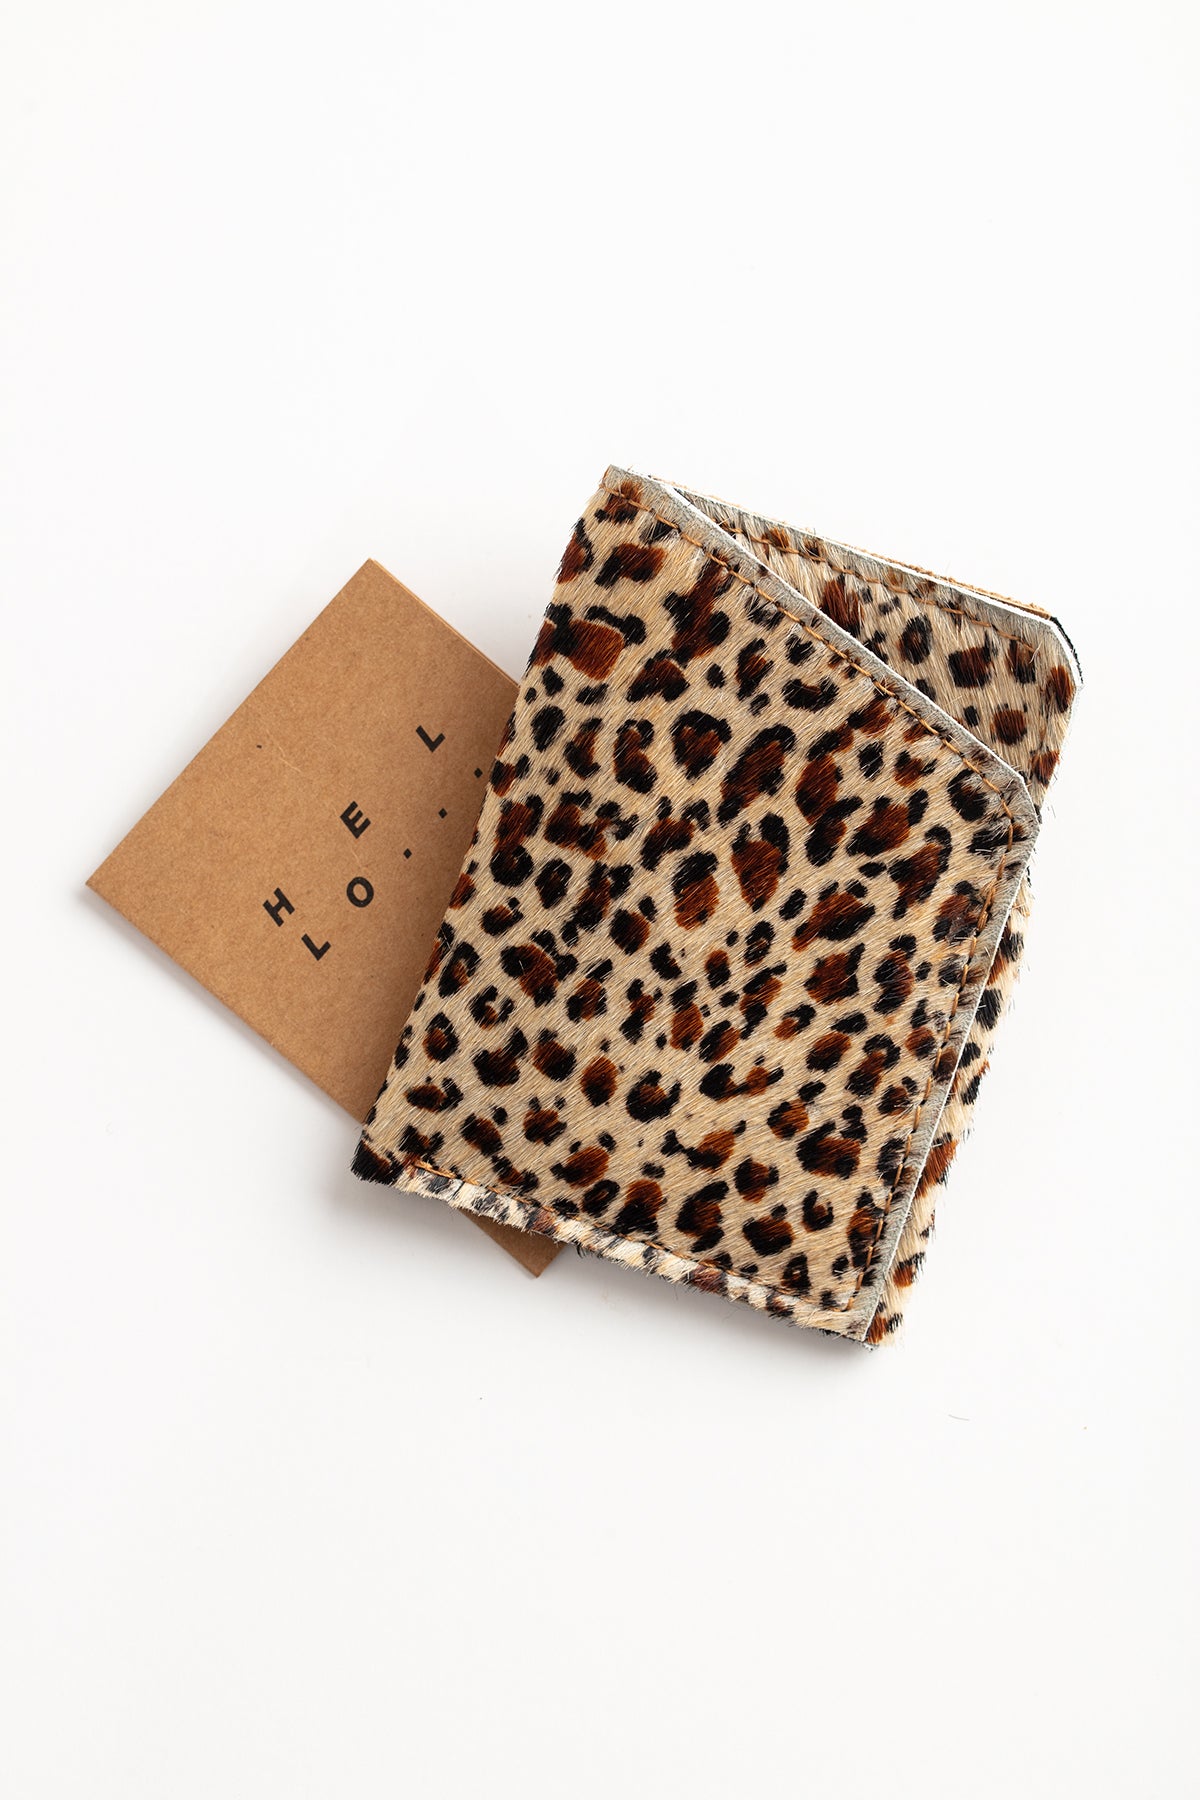   A SOFT LEATHER CARD HOLDER BY LIMA SAGRADA, crafted by local artisans, showcased against a minimalistic white background. 